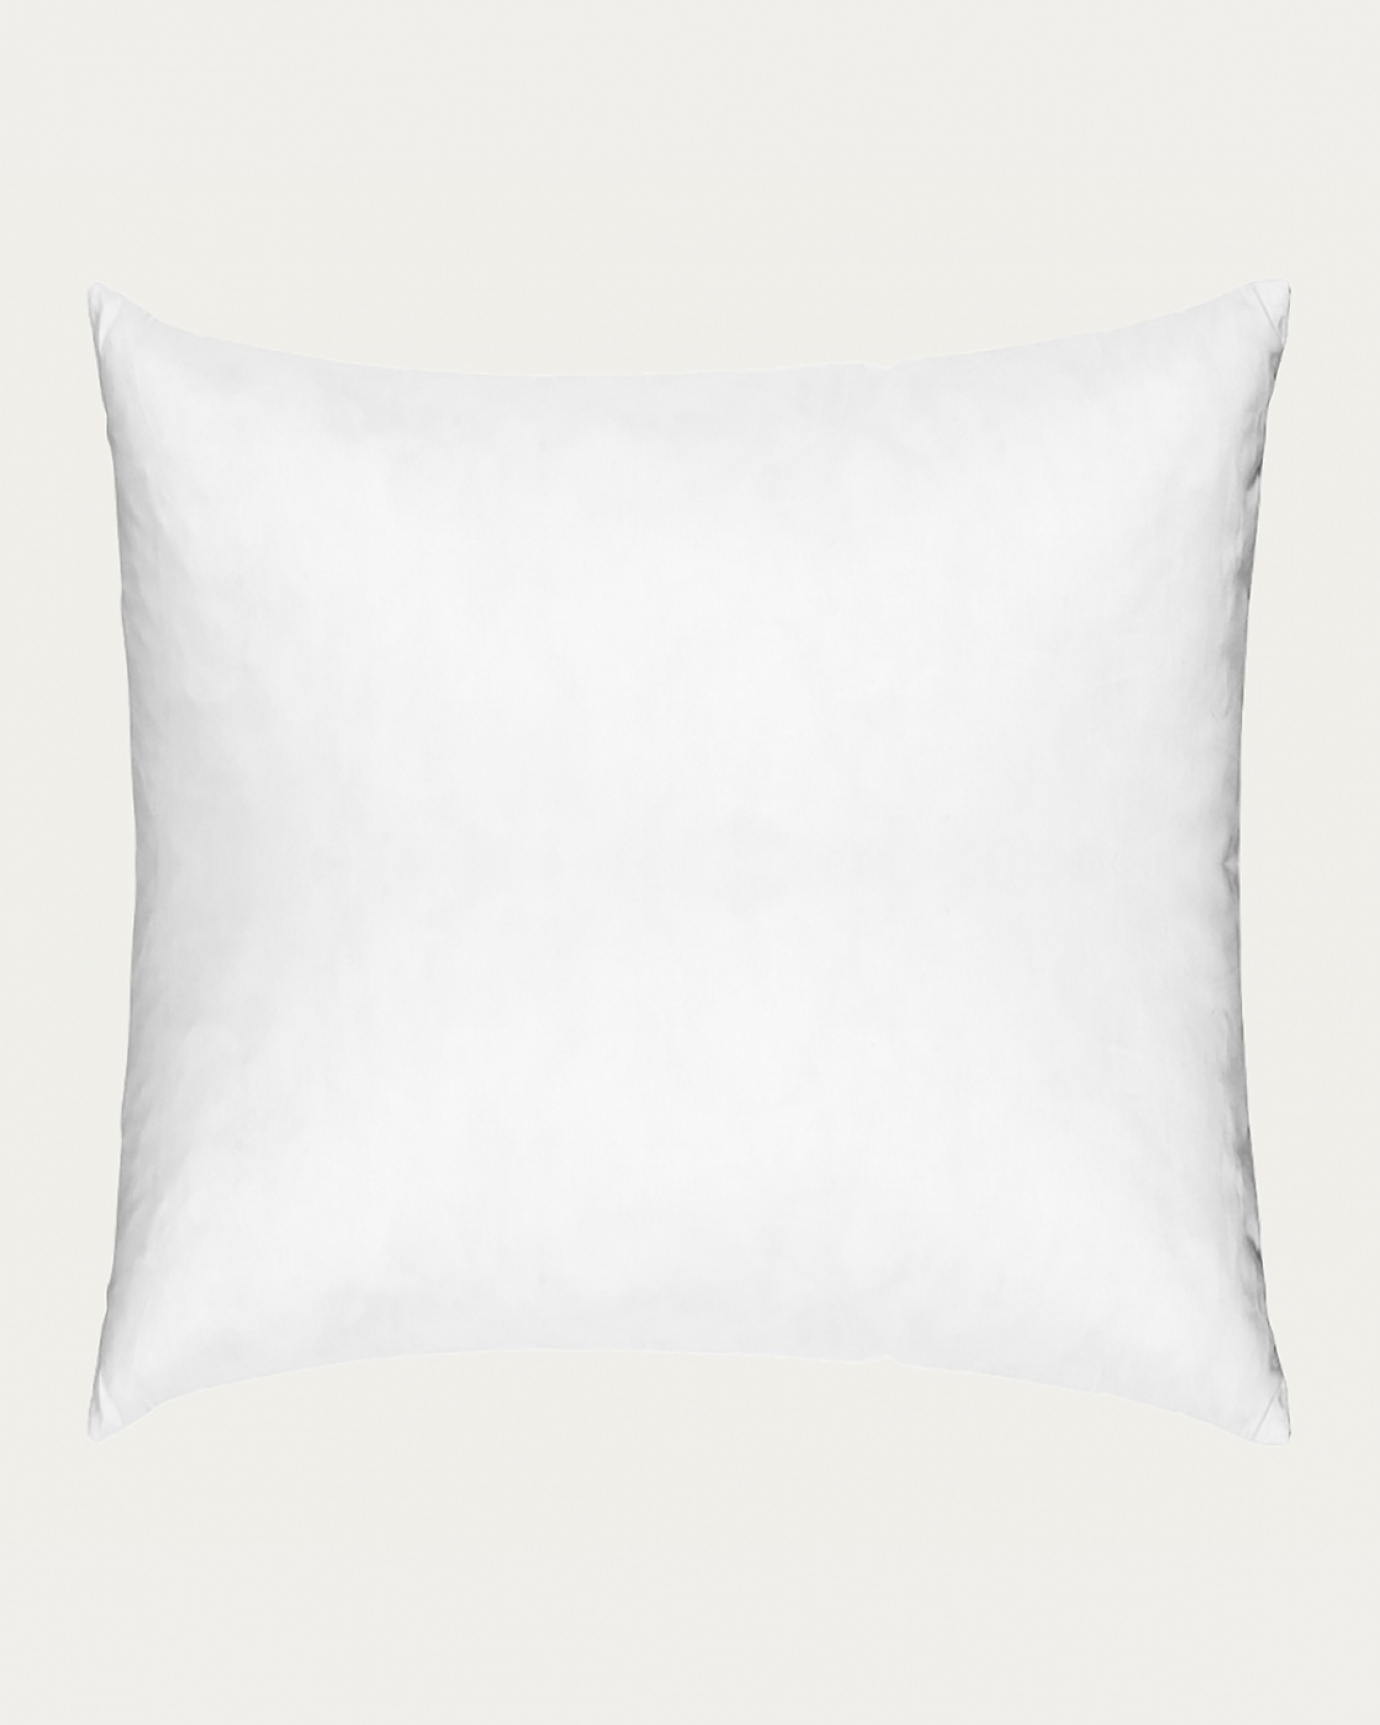 Product image white SYNTHETIC cushion insert made of cotton with polyester filling from LINUM DESIGN. Size 60x60 cm.